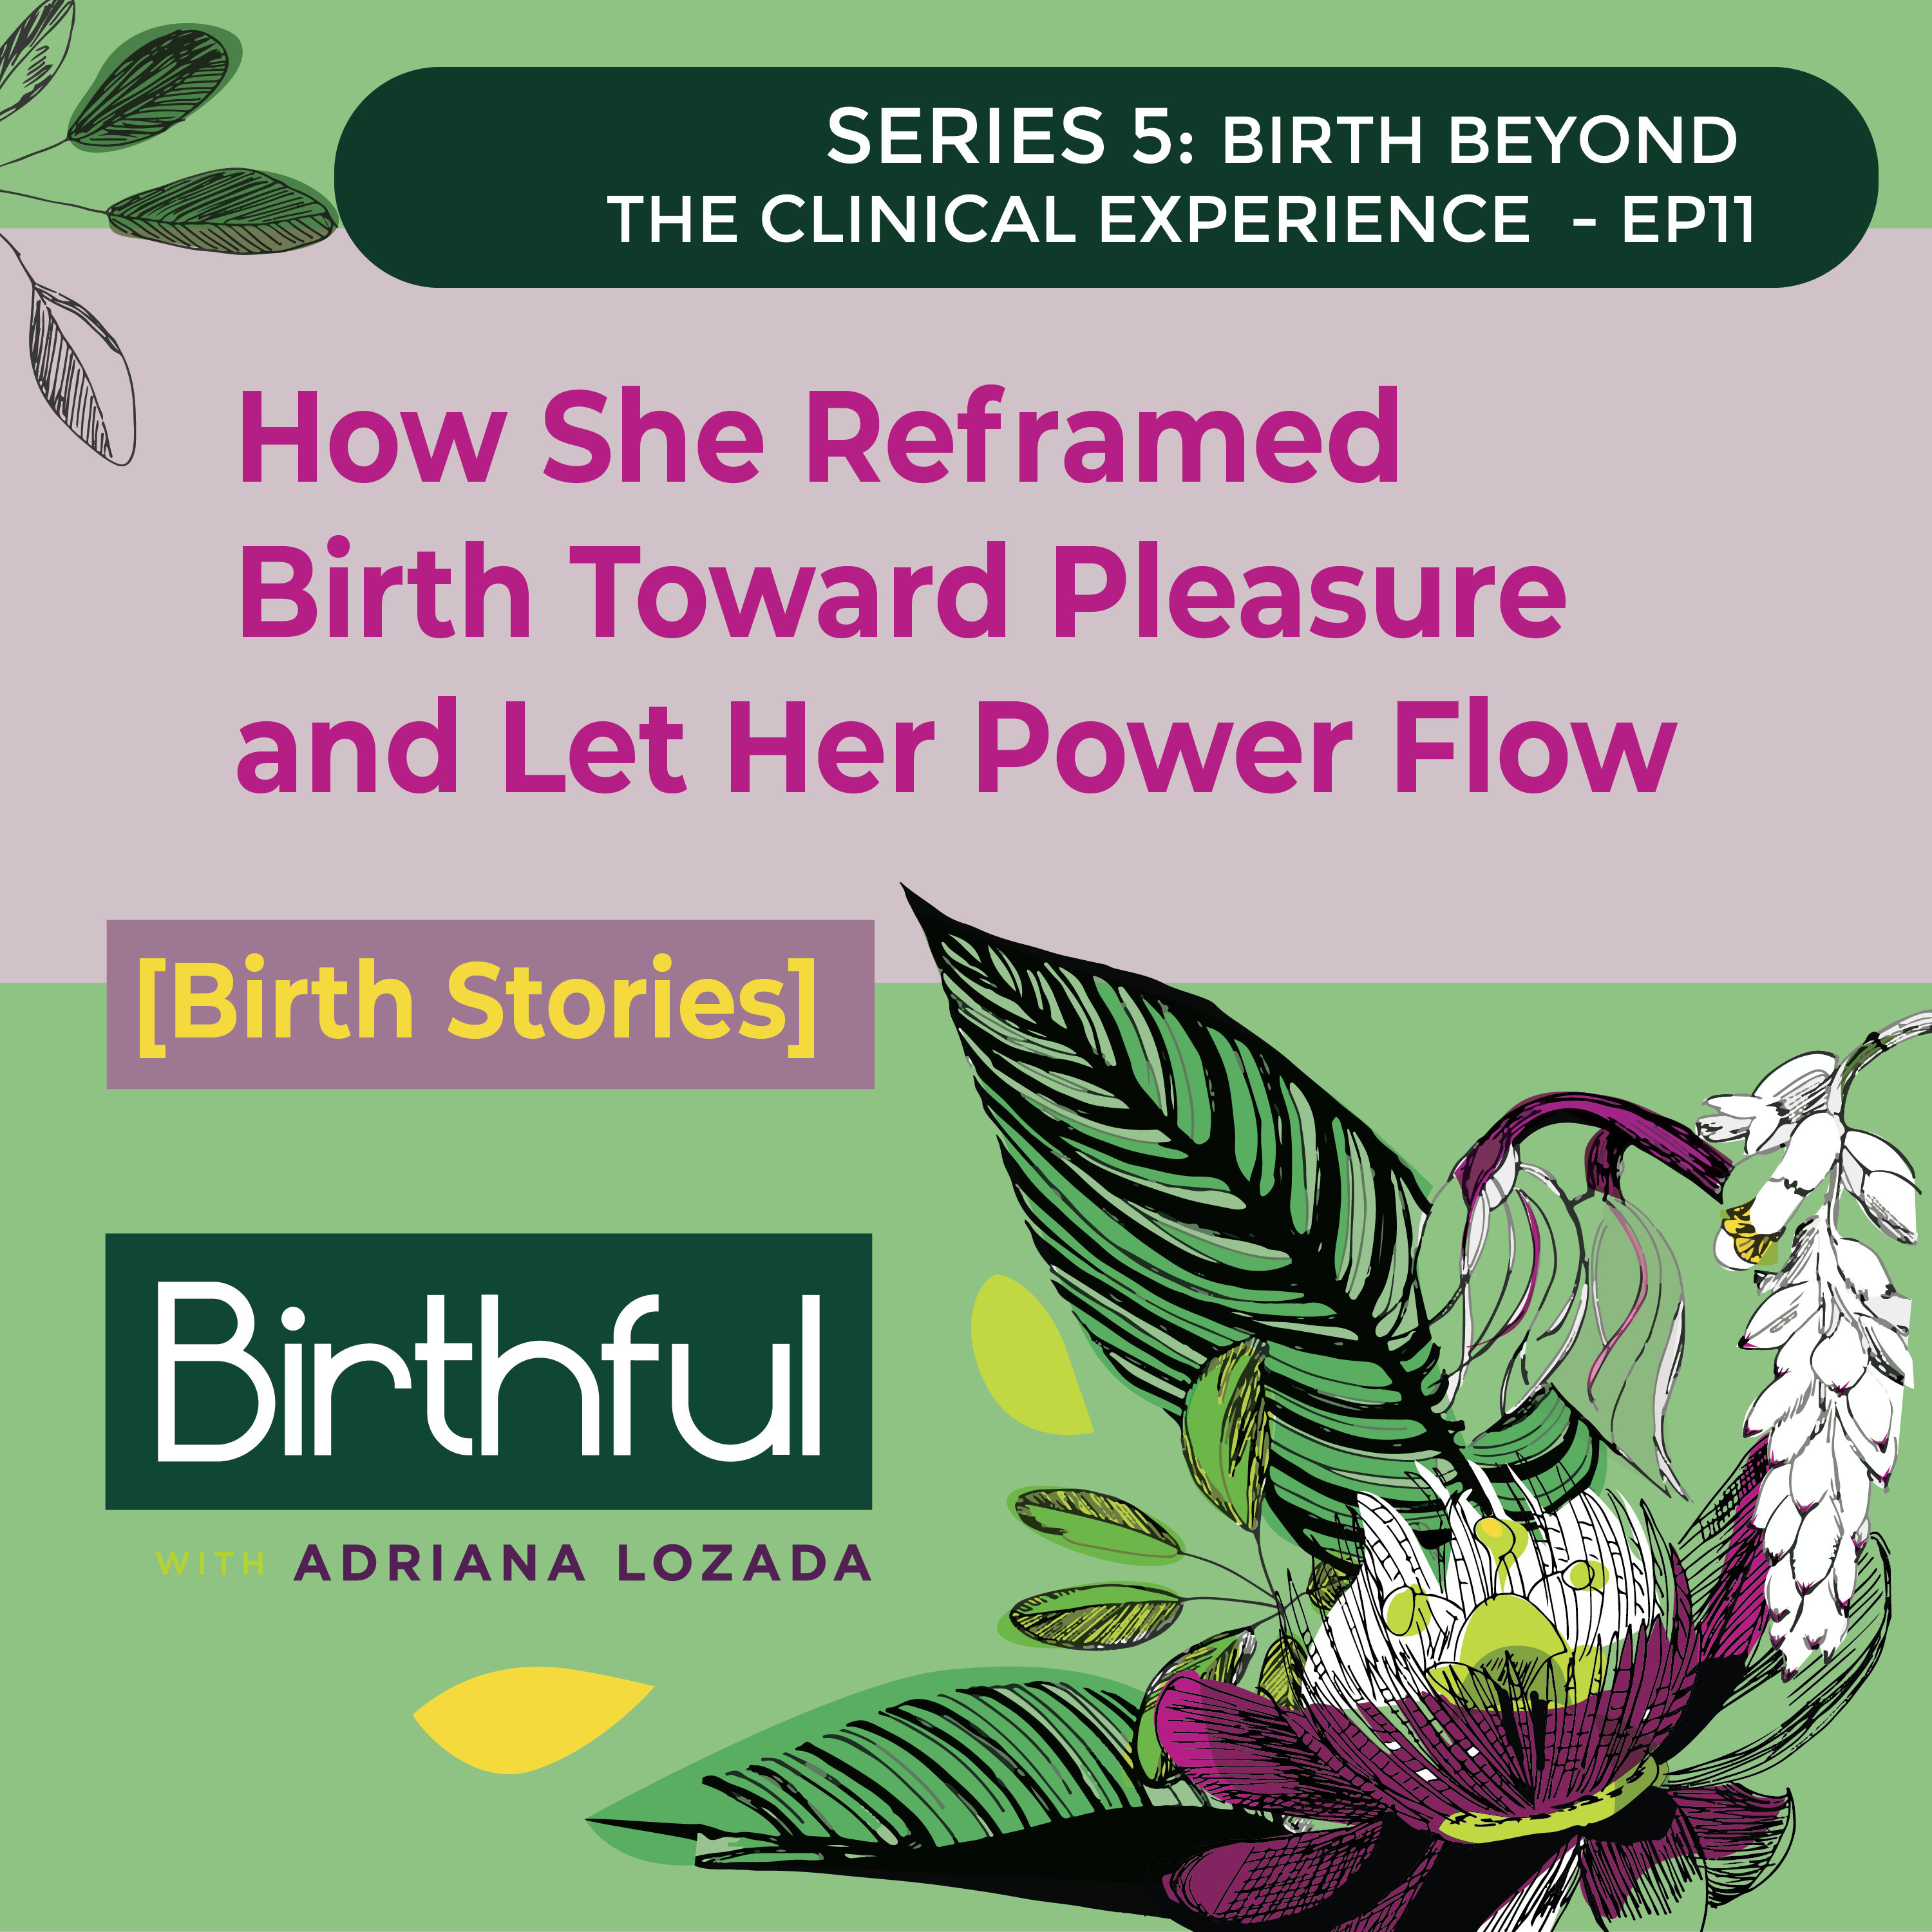 [Birth Stories] How She Reframed Birth Toward Pleasure and Let Her Power Flow